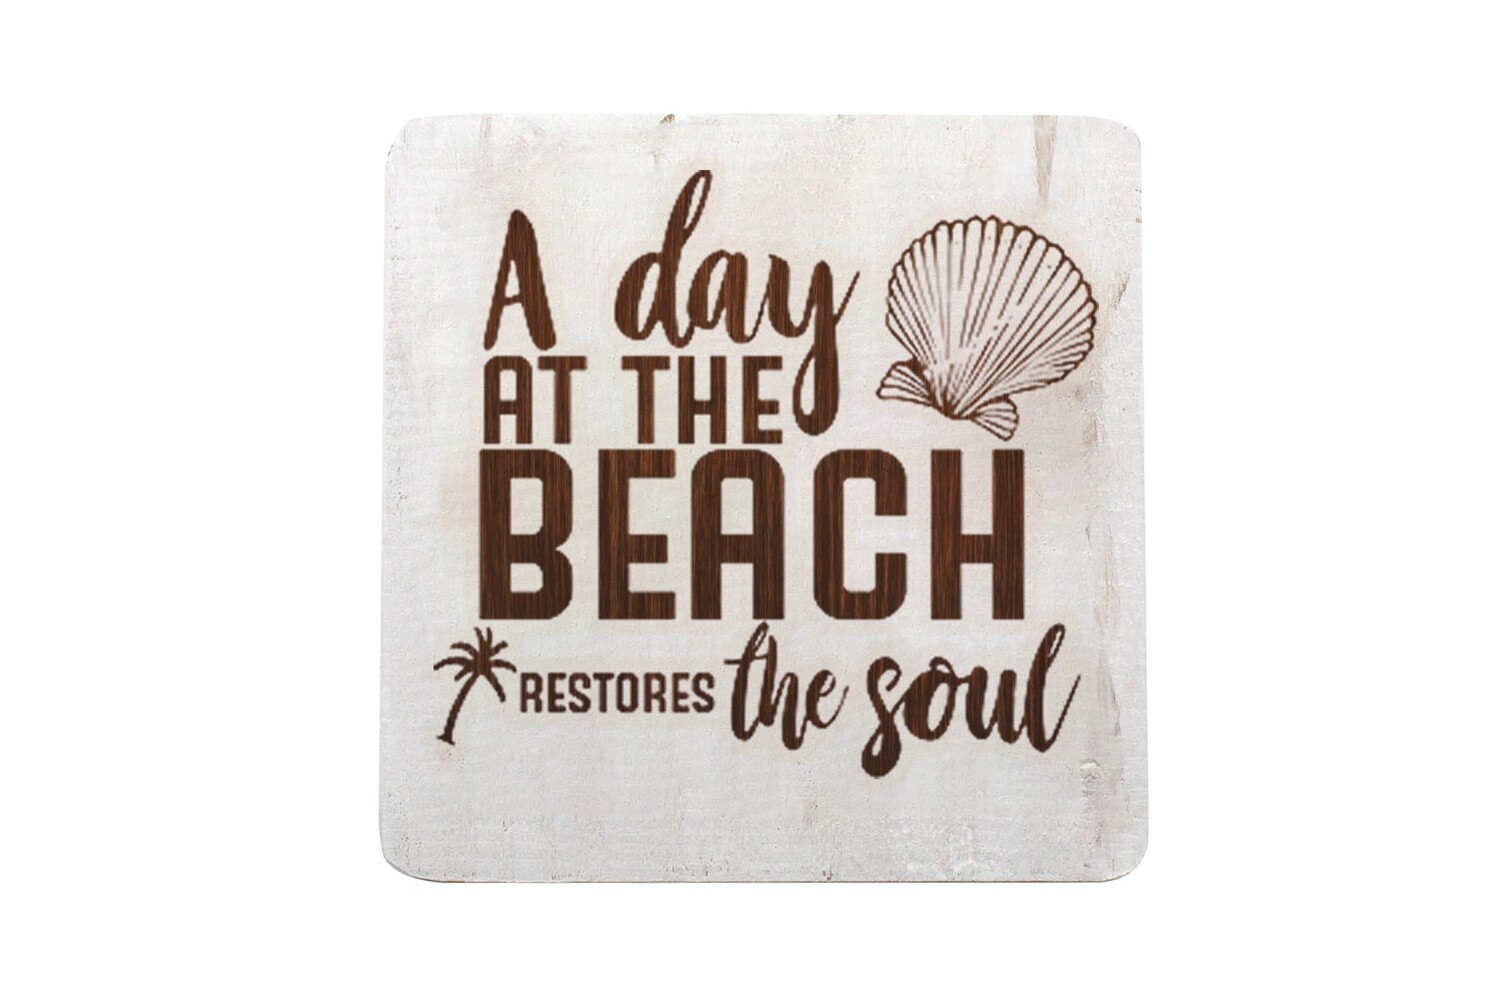 "A day at the Beach Restores the Soul" Hand-Painted Wood Coaster Set